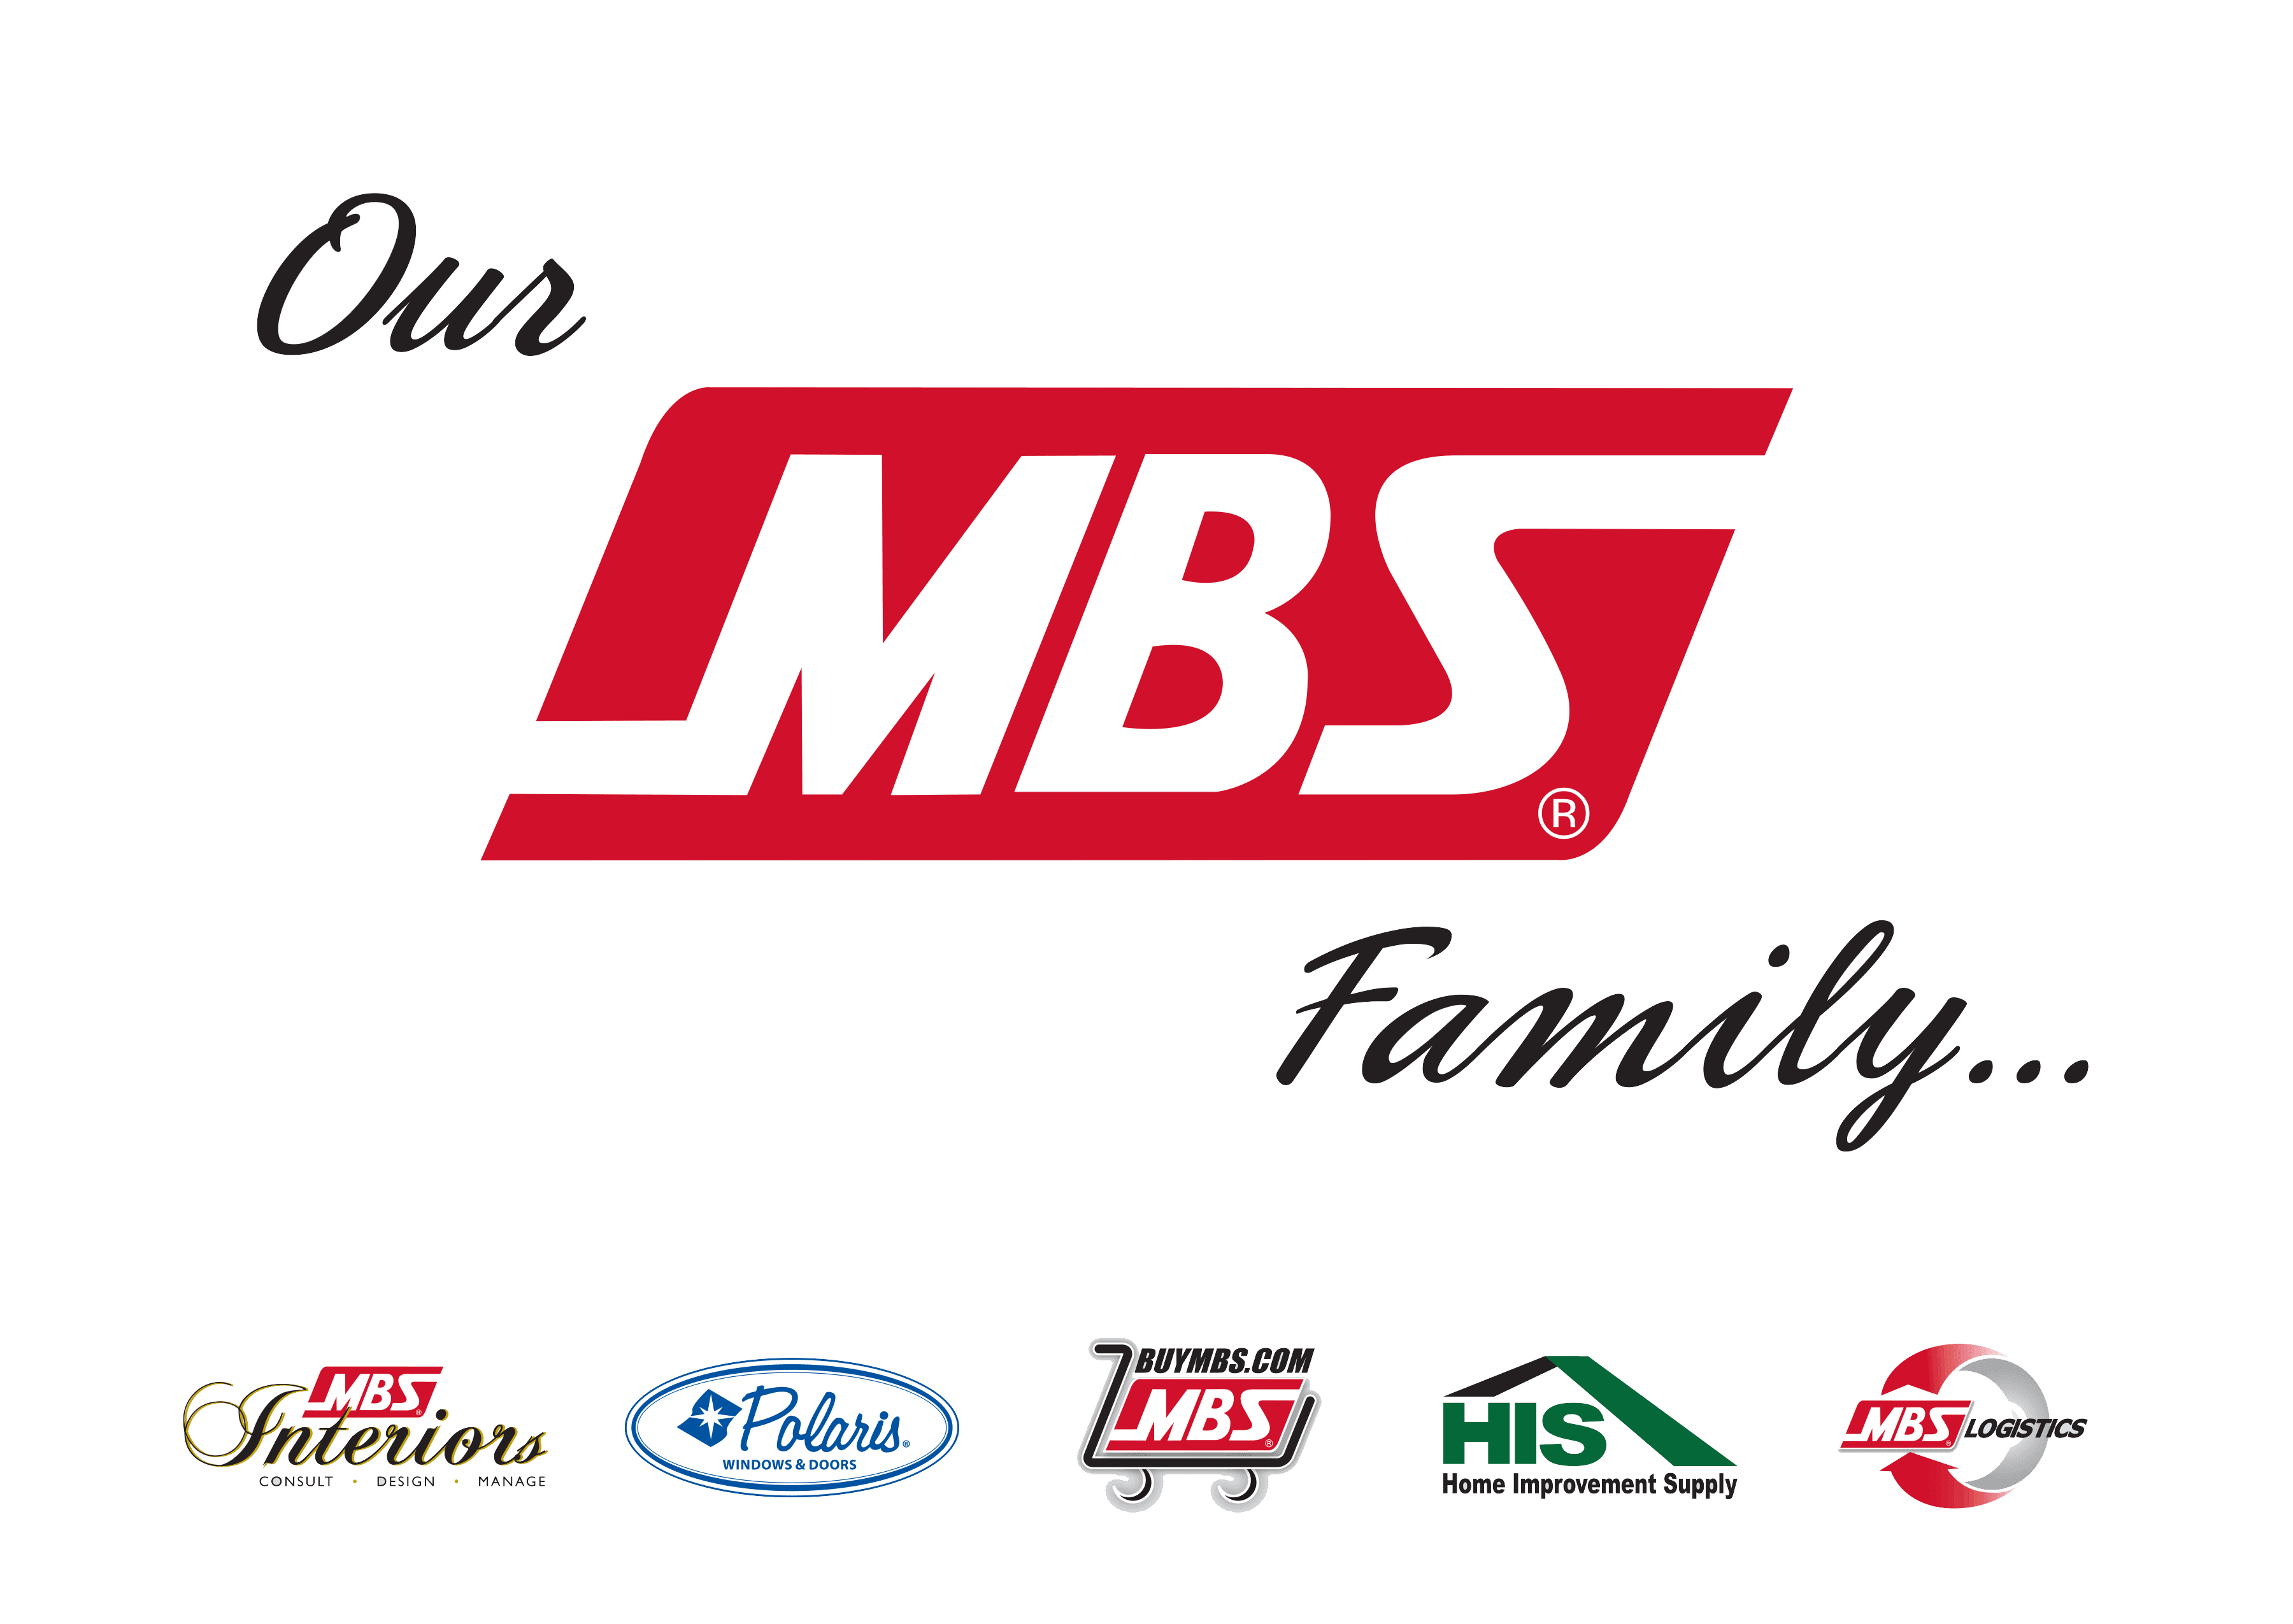 MBS is a family of companies